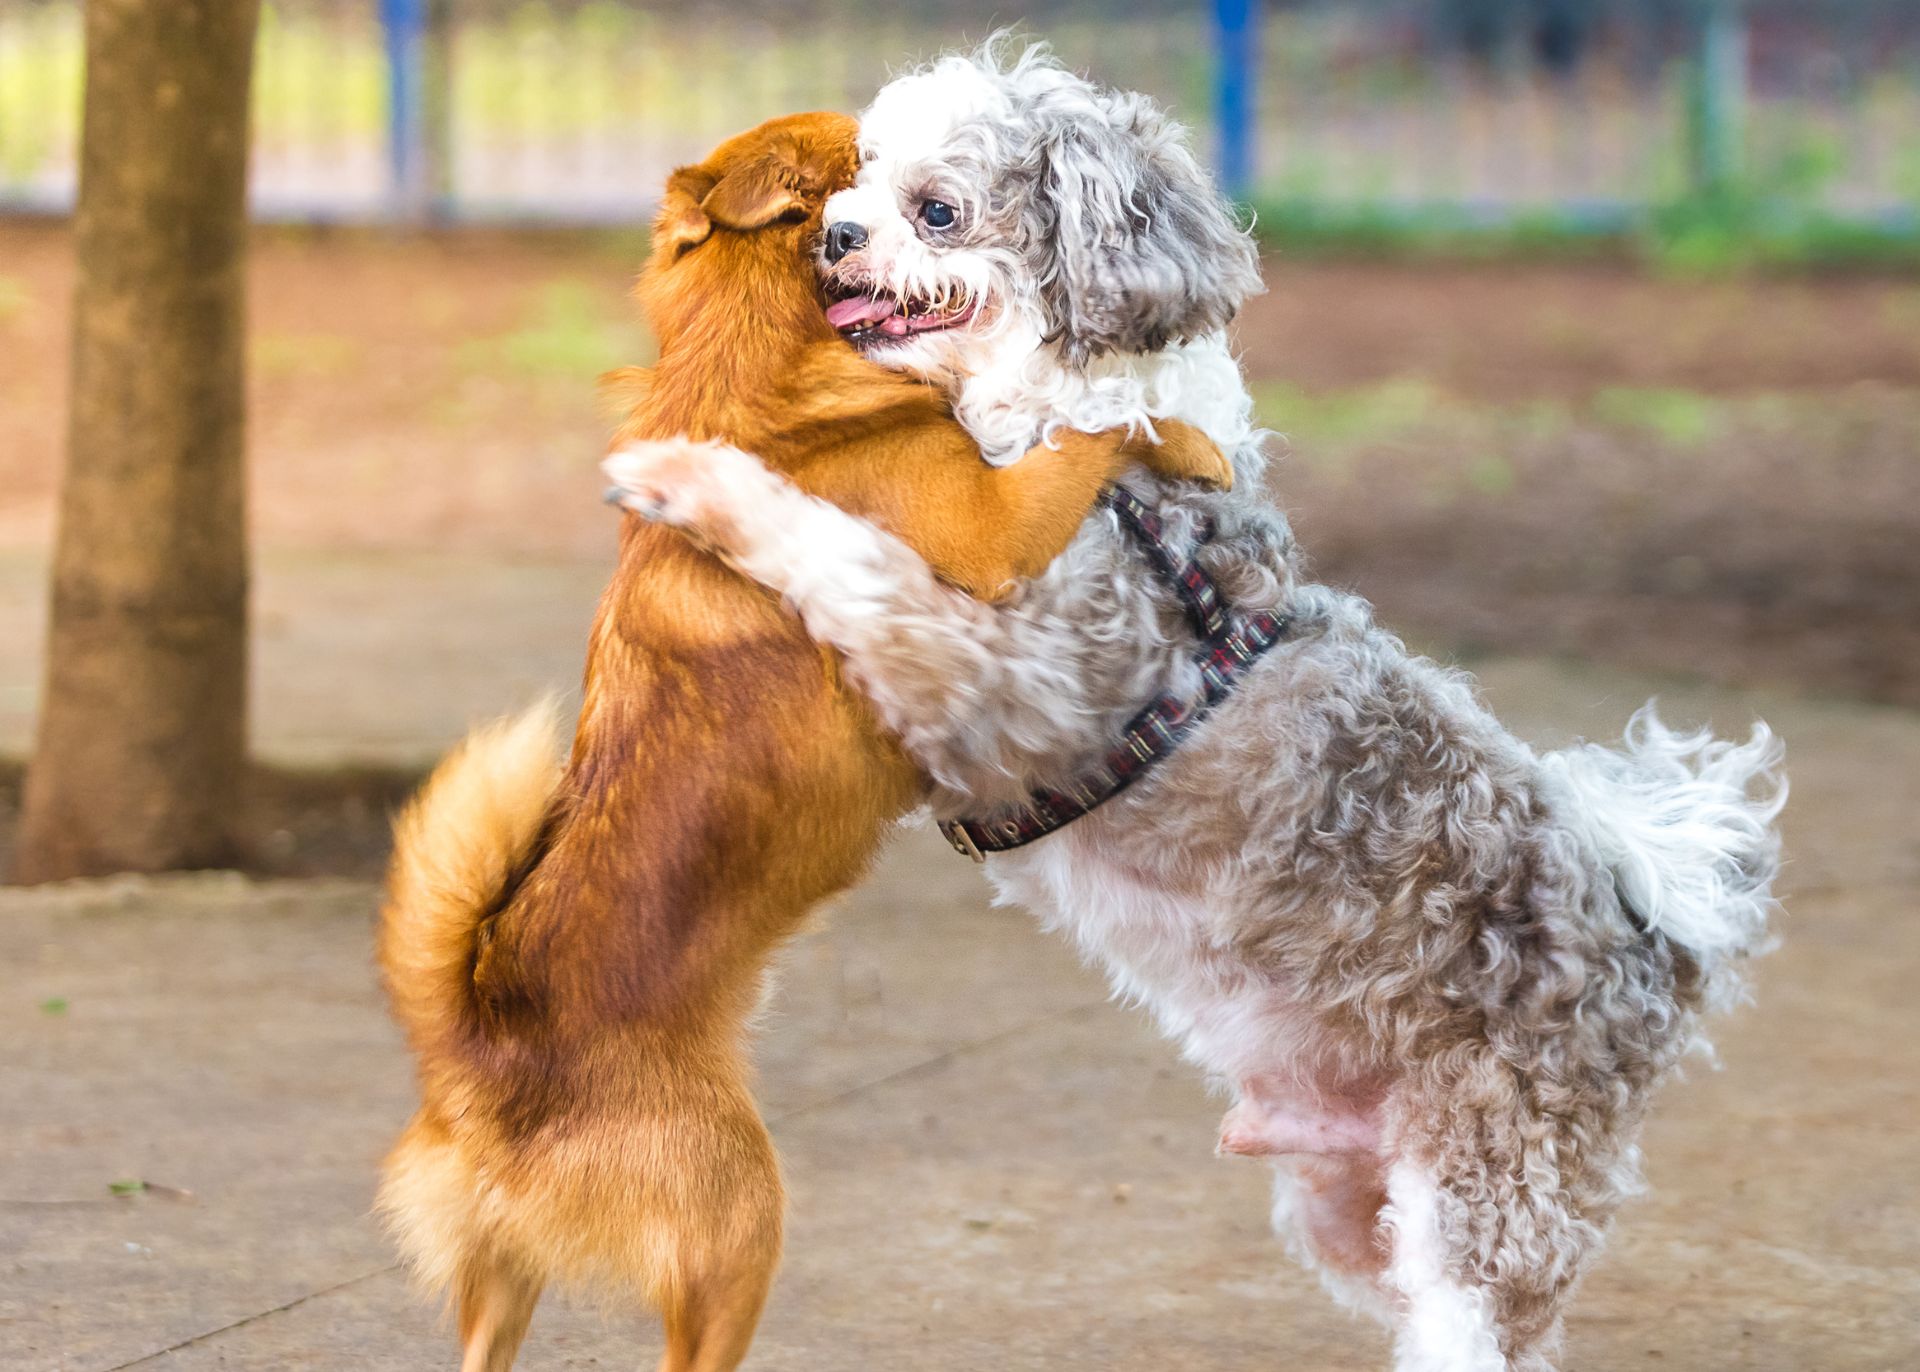 Small red dog and small, older grey and white dog on hind legs and hugging each other.